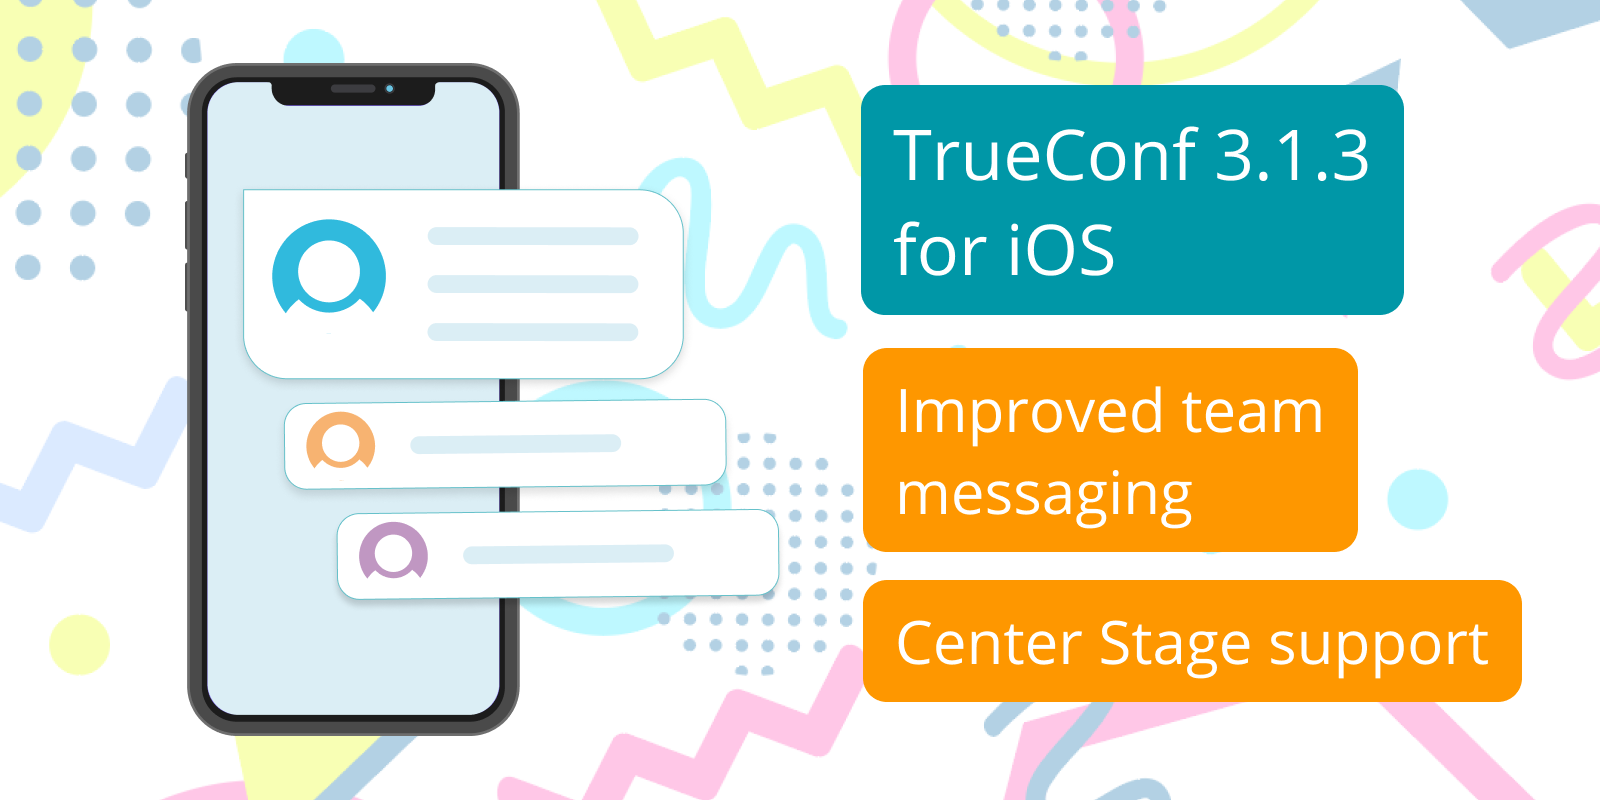 TrueConf 3.1.3 for iOS: Improved team messaging and Center Stage support 6